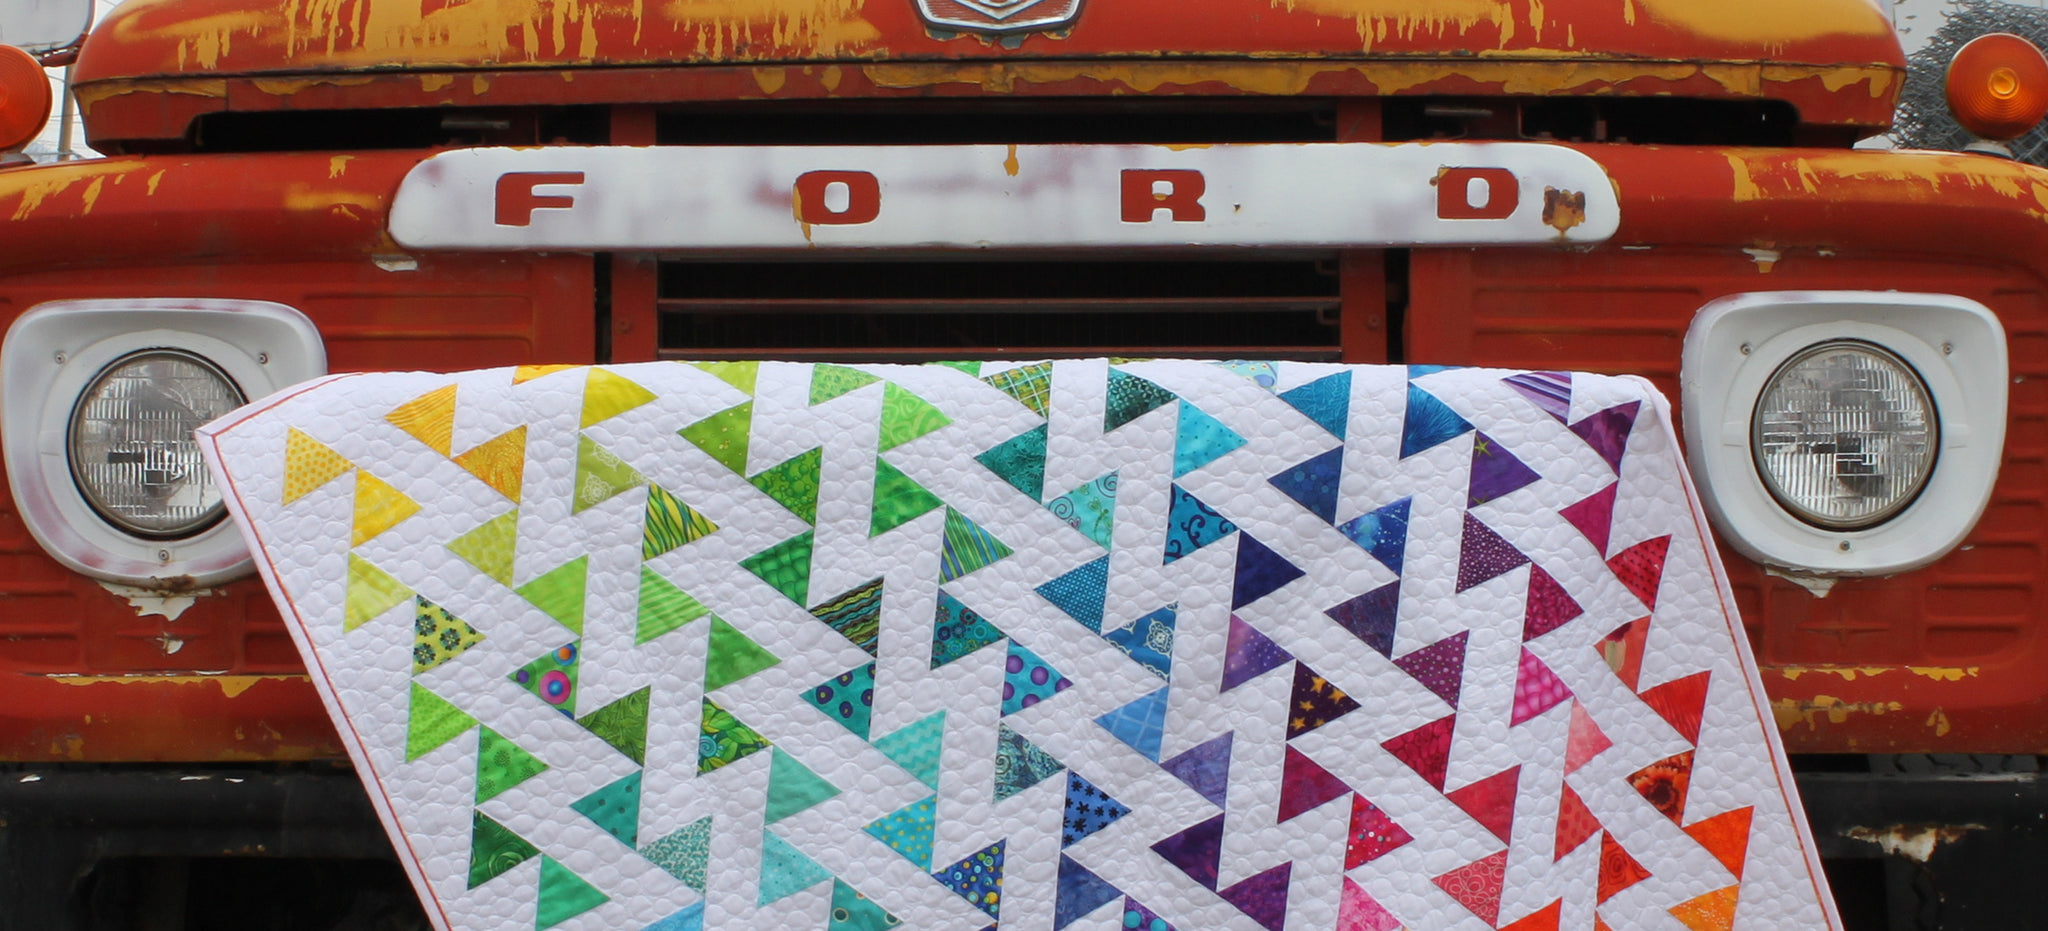 Introducing the Lombard Street quilt!